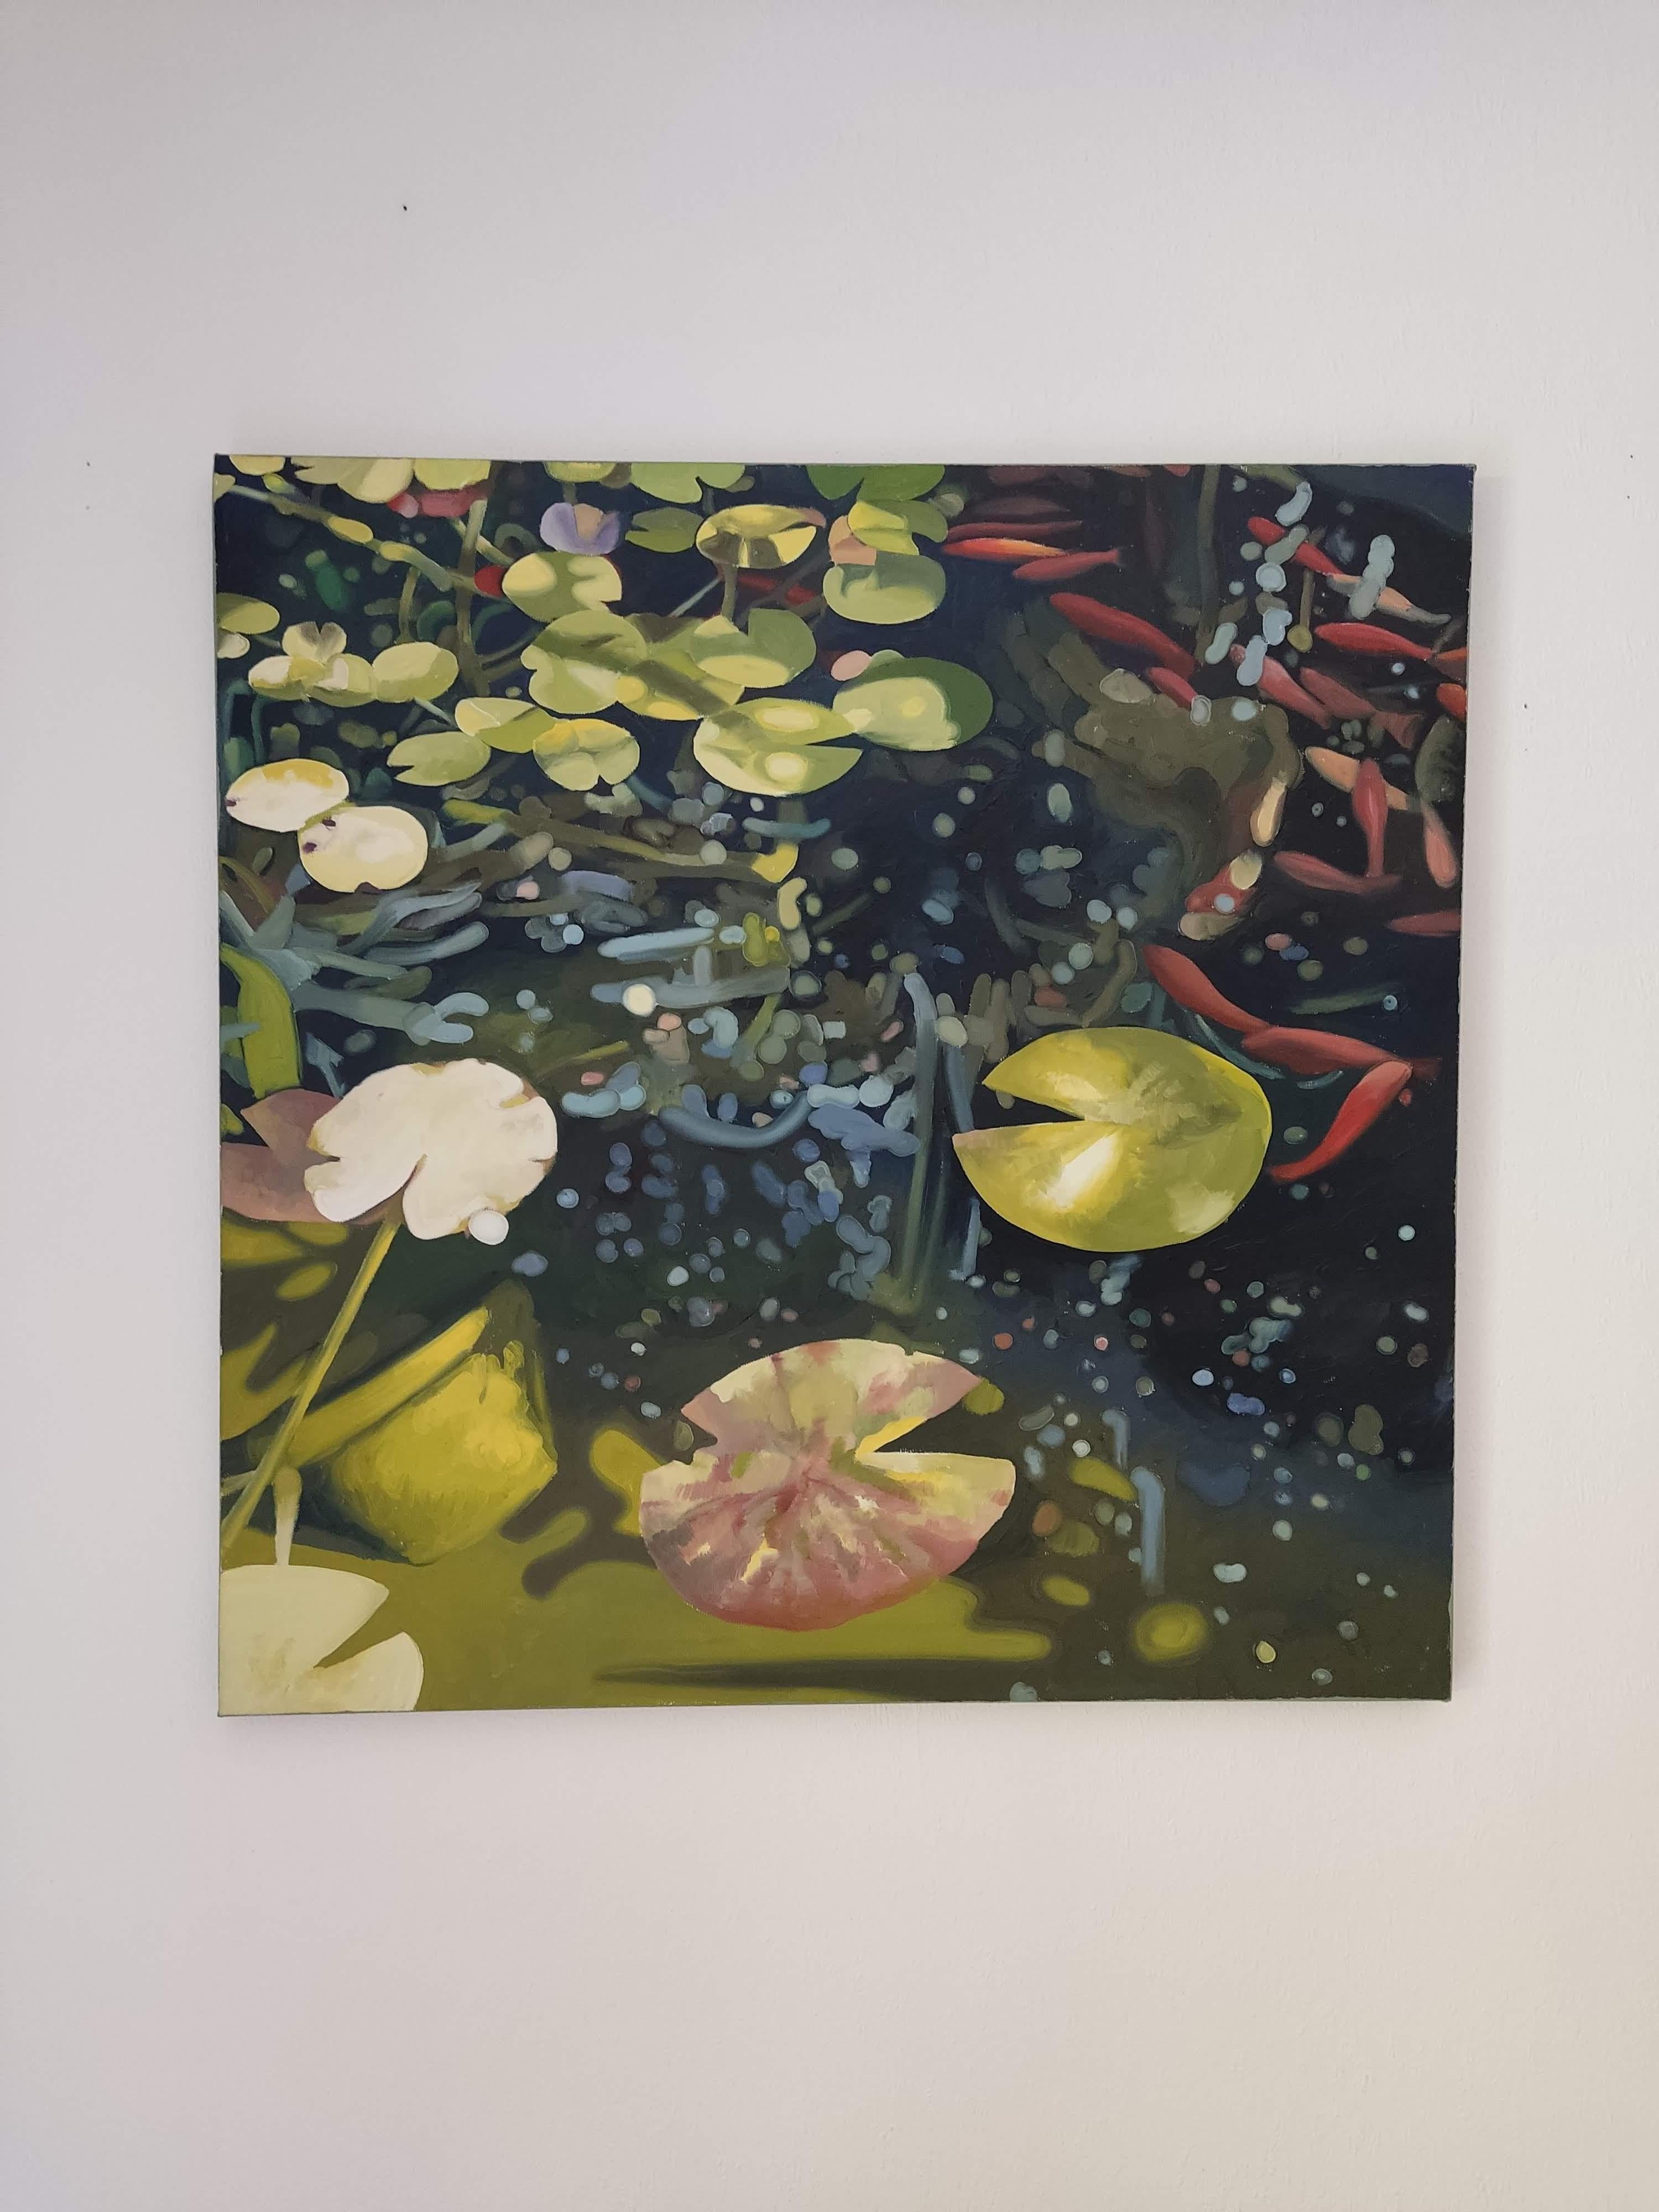 Oil on linen canvas - Water lily, Plant, Water, Goldfish
Work Title : Bassin (EN : Water Basin)
Artist : Raphaël Renaud (French artist, Born in 1974, lives and works in France and Berlin (Germany).)
The work is signed and dated verso. Unique